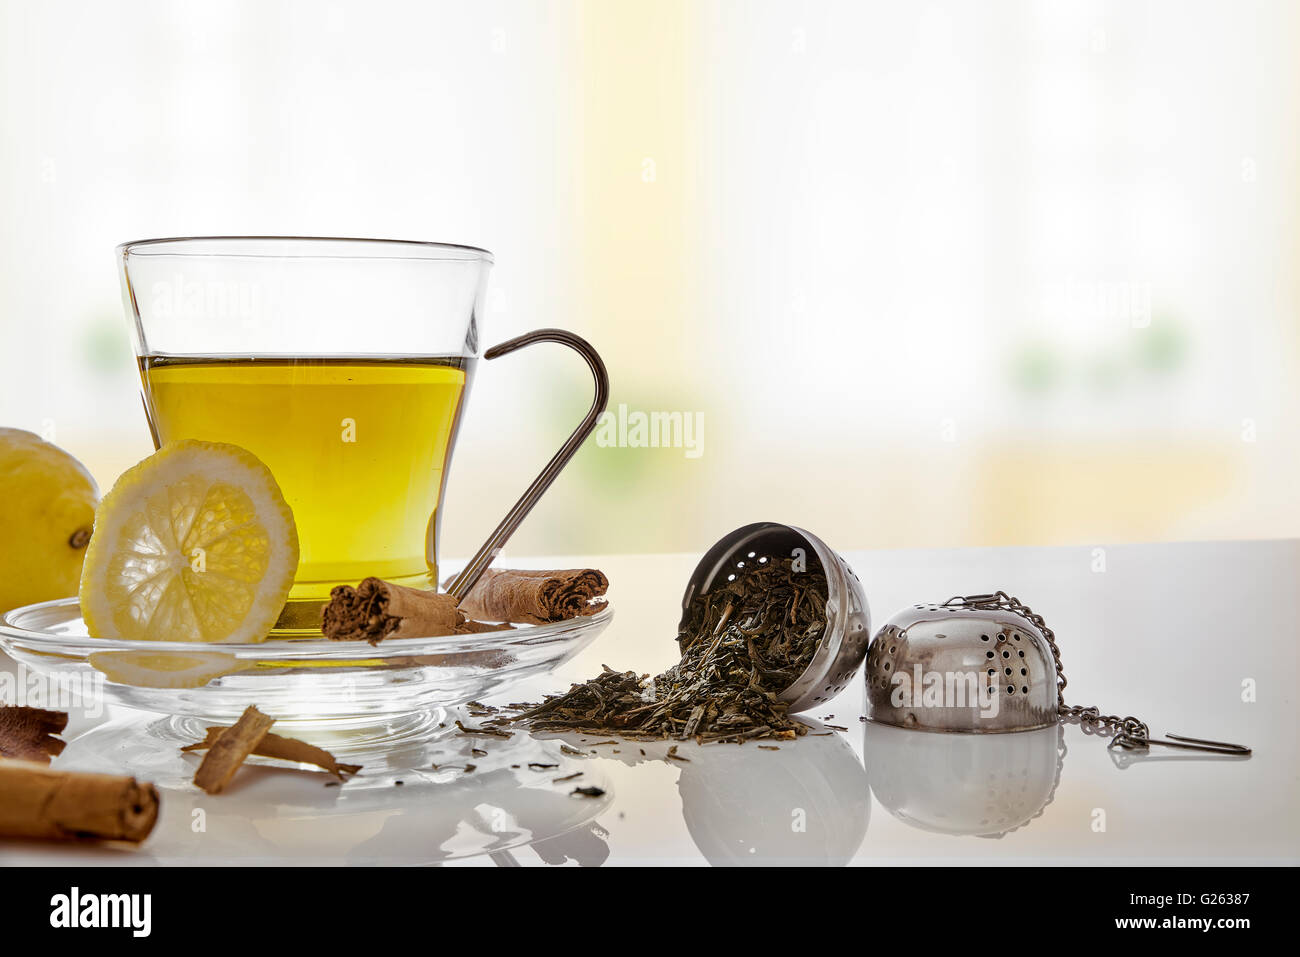 Glass cup green tea with cinnamon stick and lemon on a table in the living room. With metallic strainer Horizontal composition. Stock Photo